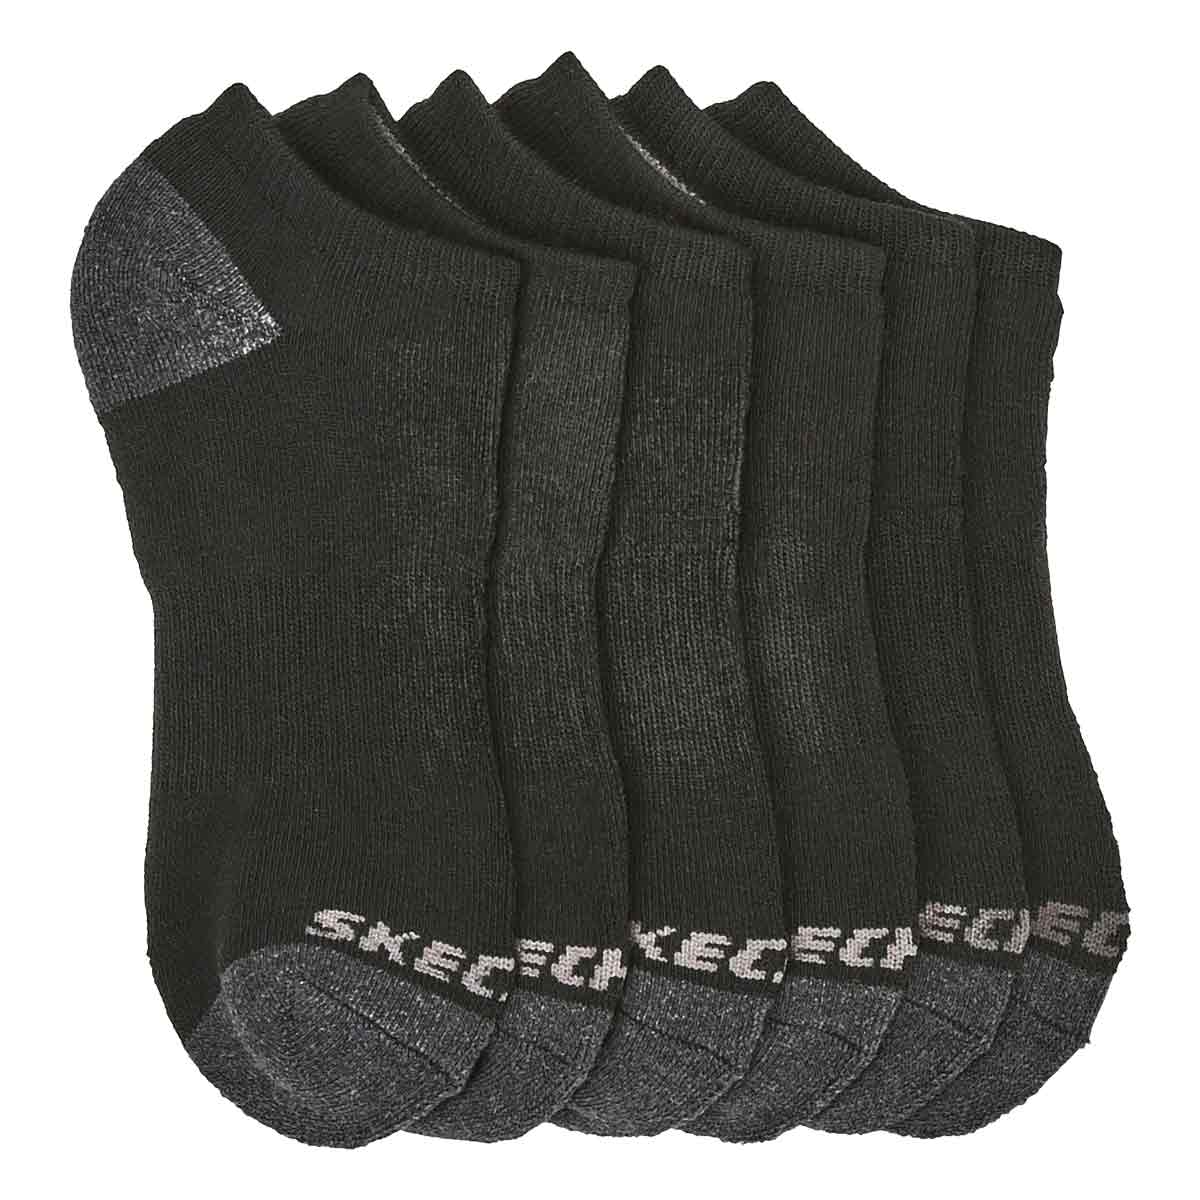 Boys' No Show Full Terry Sock - 6 pack